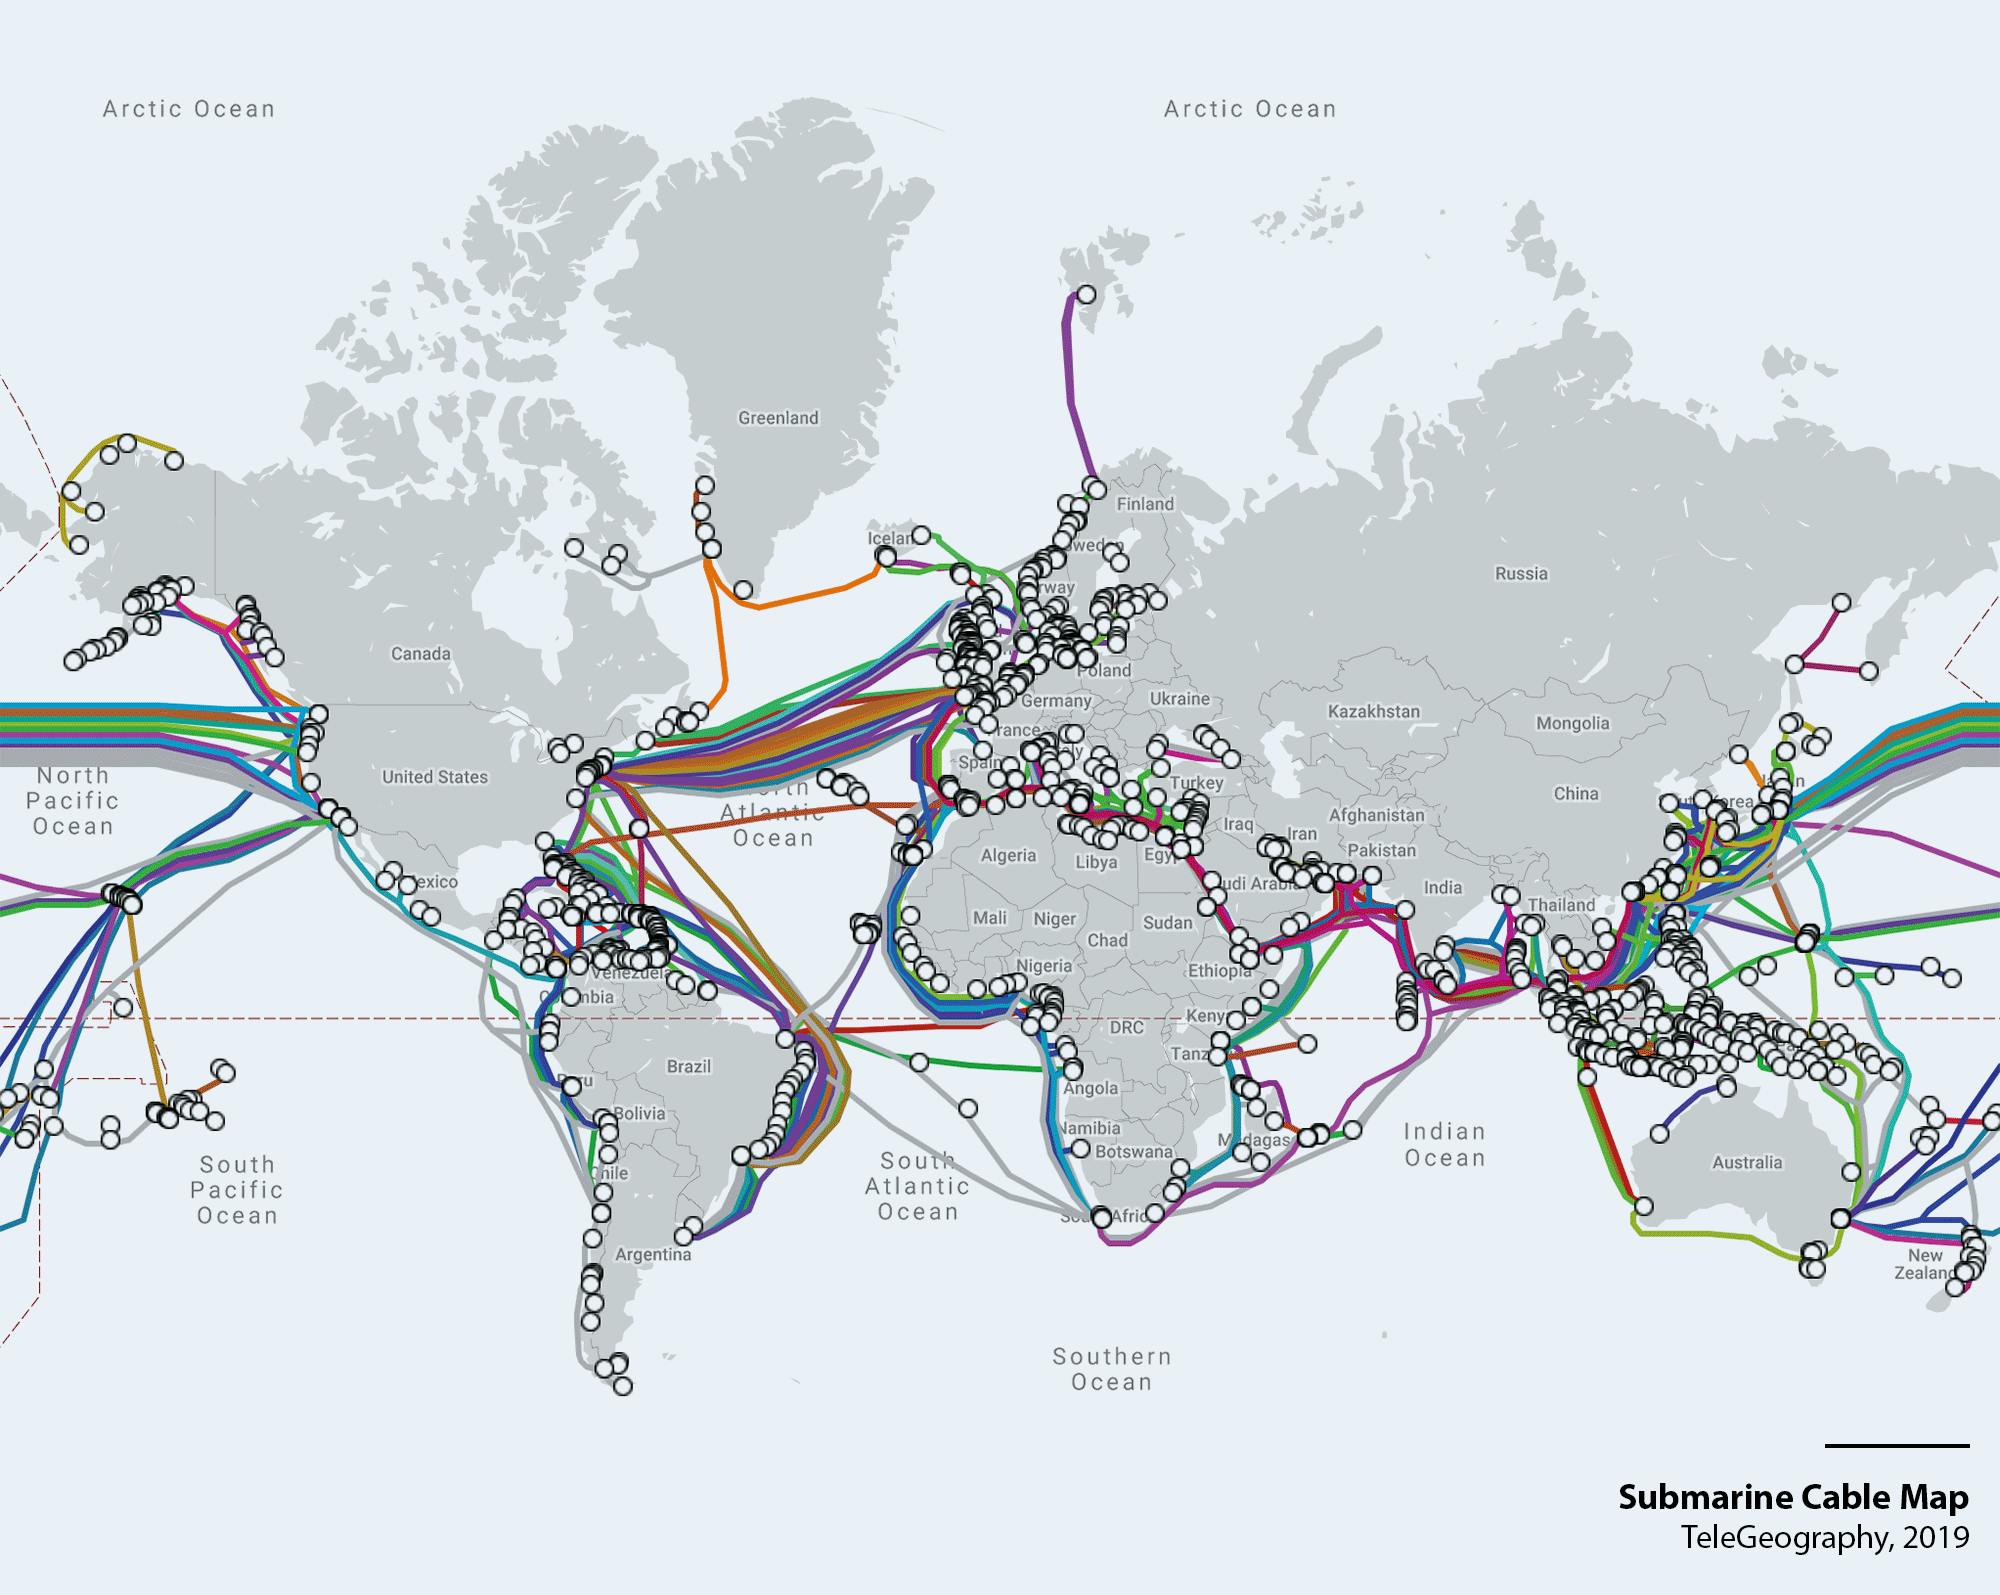 A image that shows cables under the sea